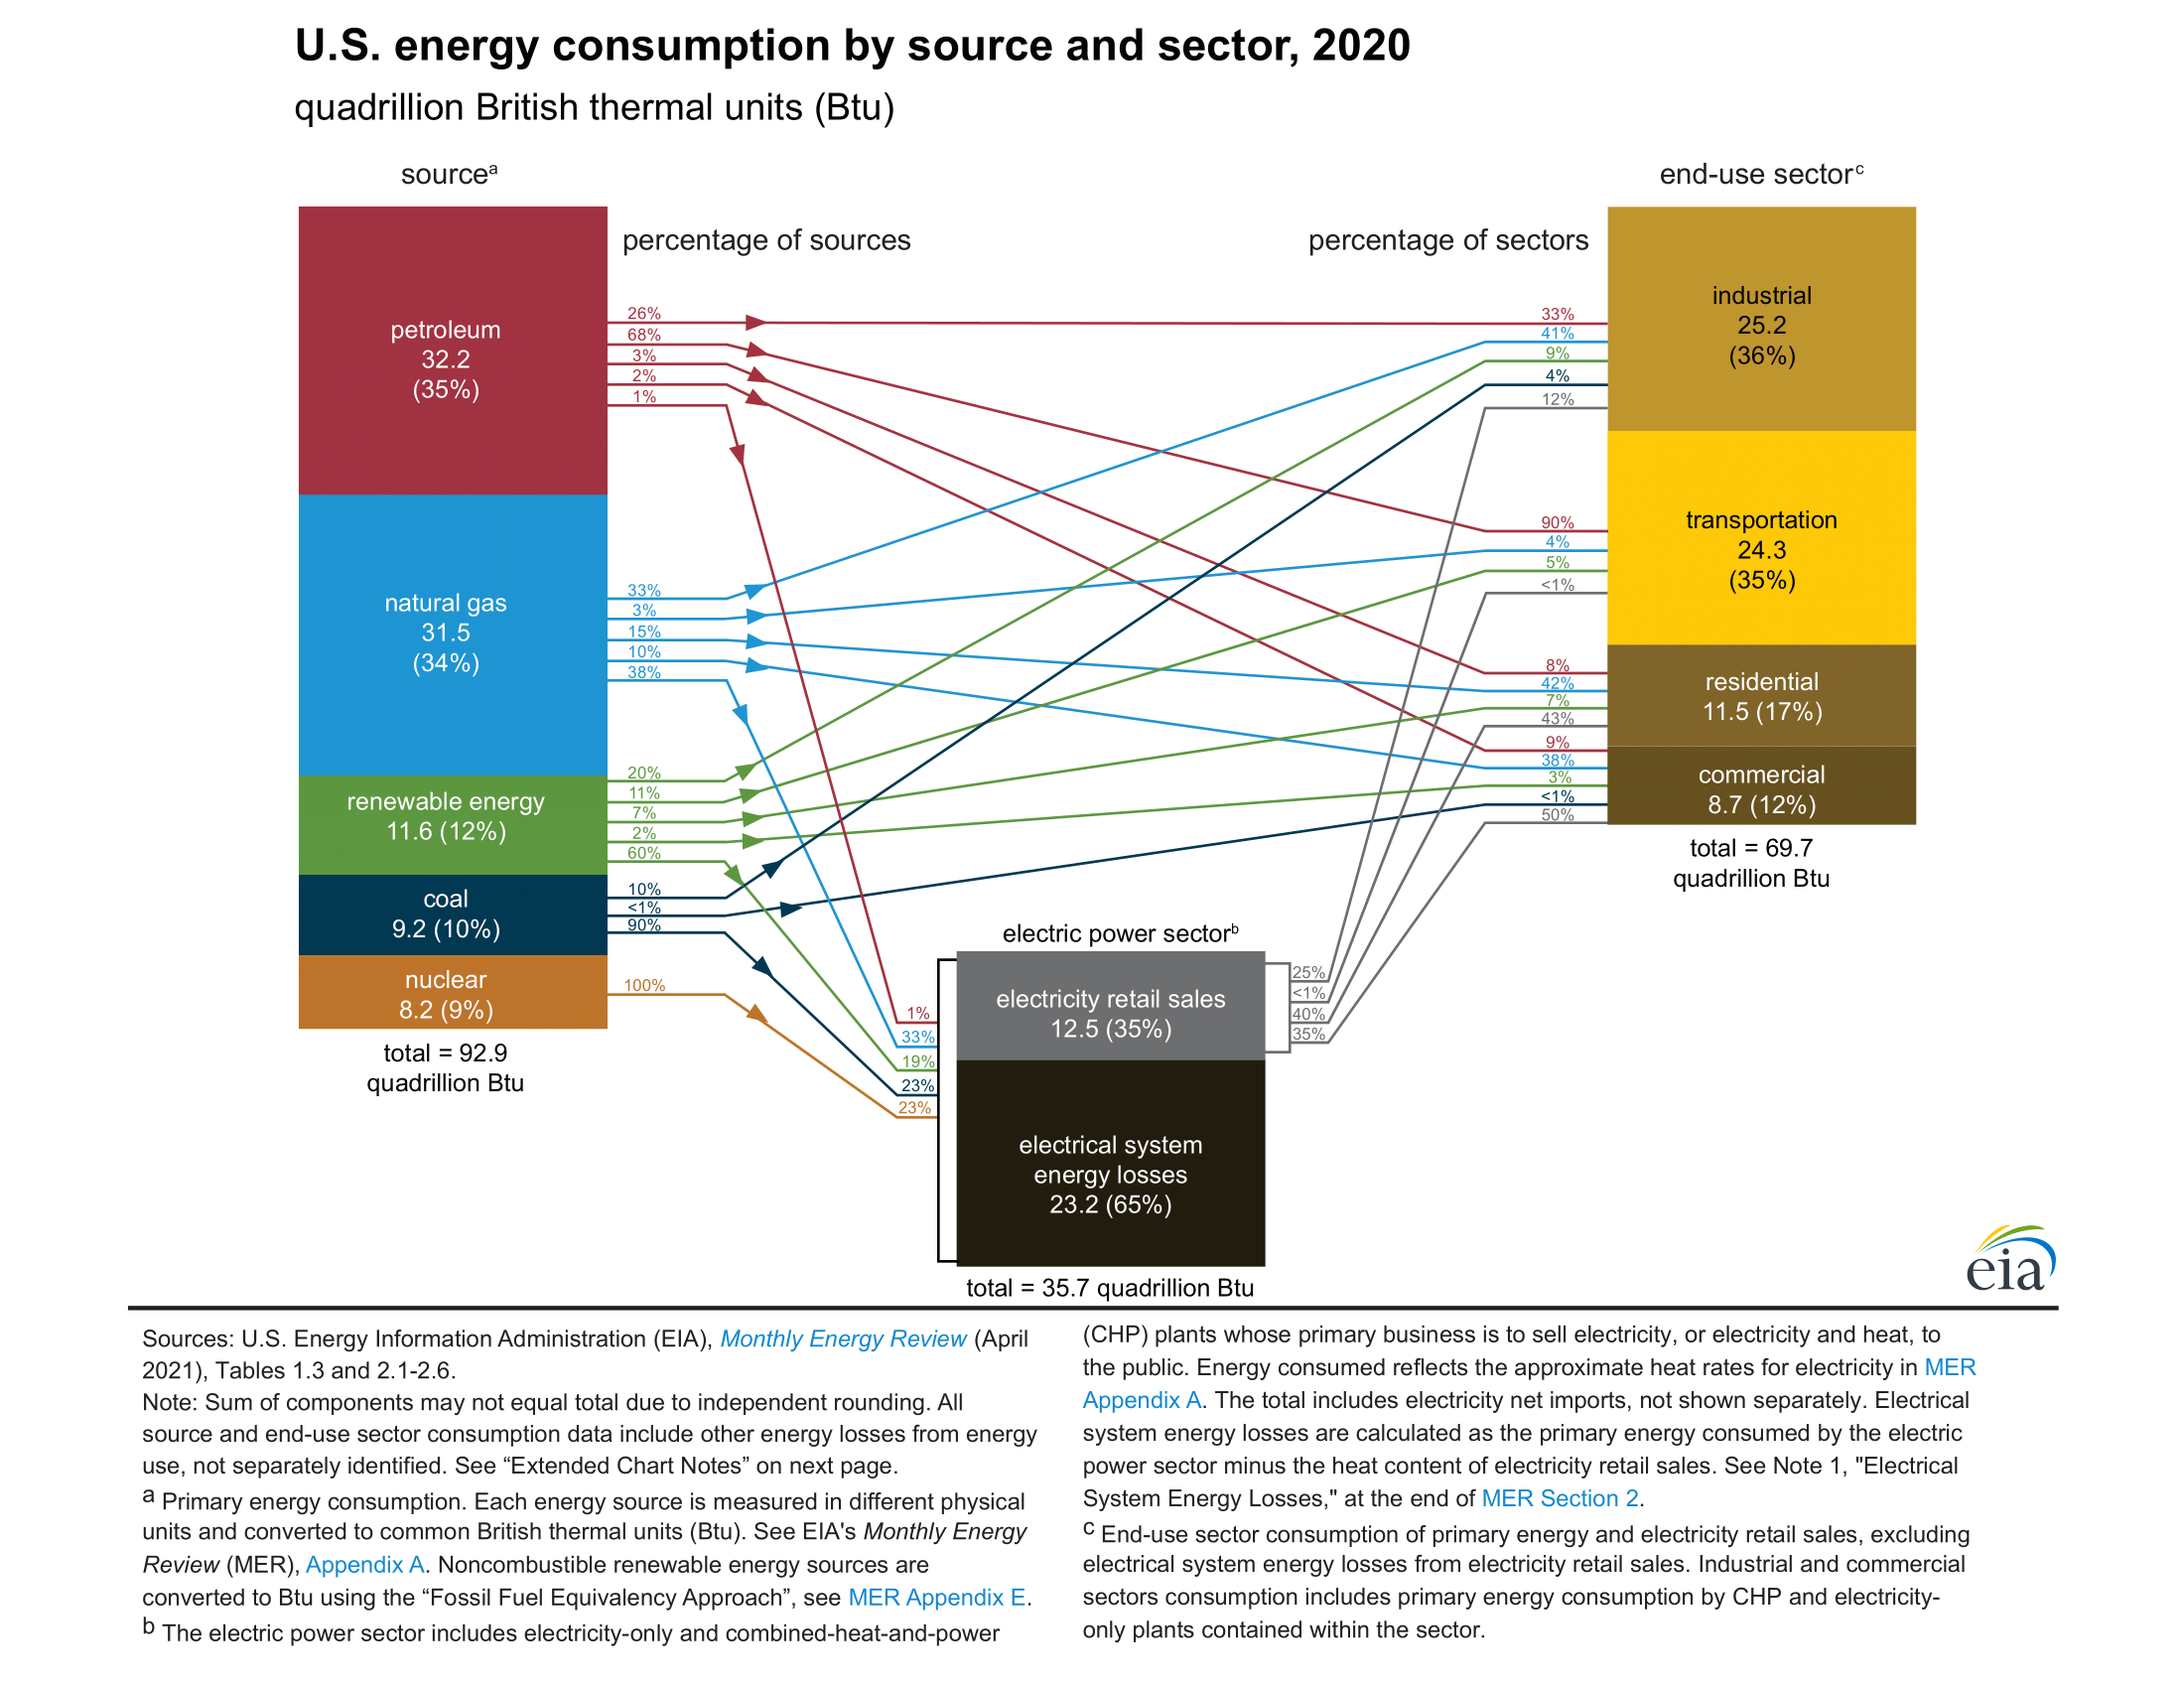 US Energy Consumption by Source and Sector, 2020-1